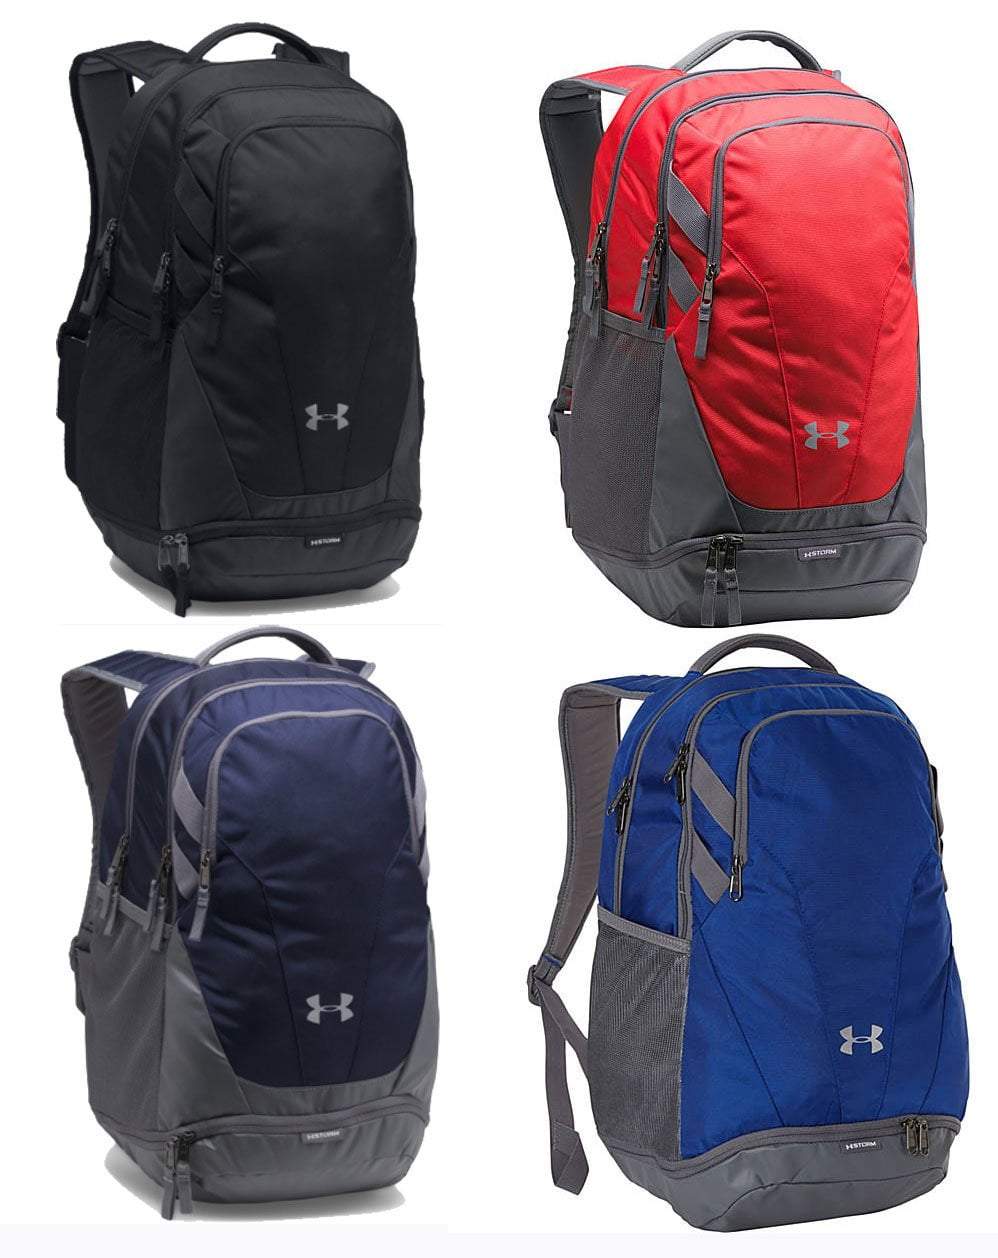 Under Armour Hustle Storm Backpack in Blue